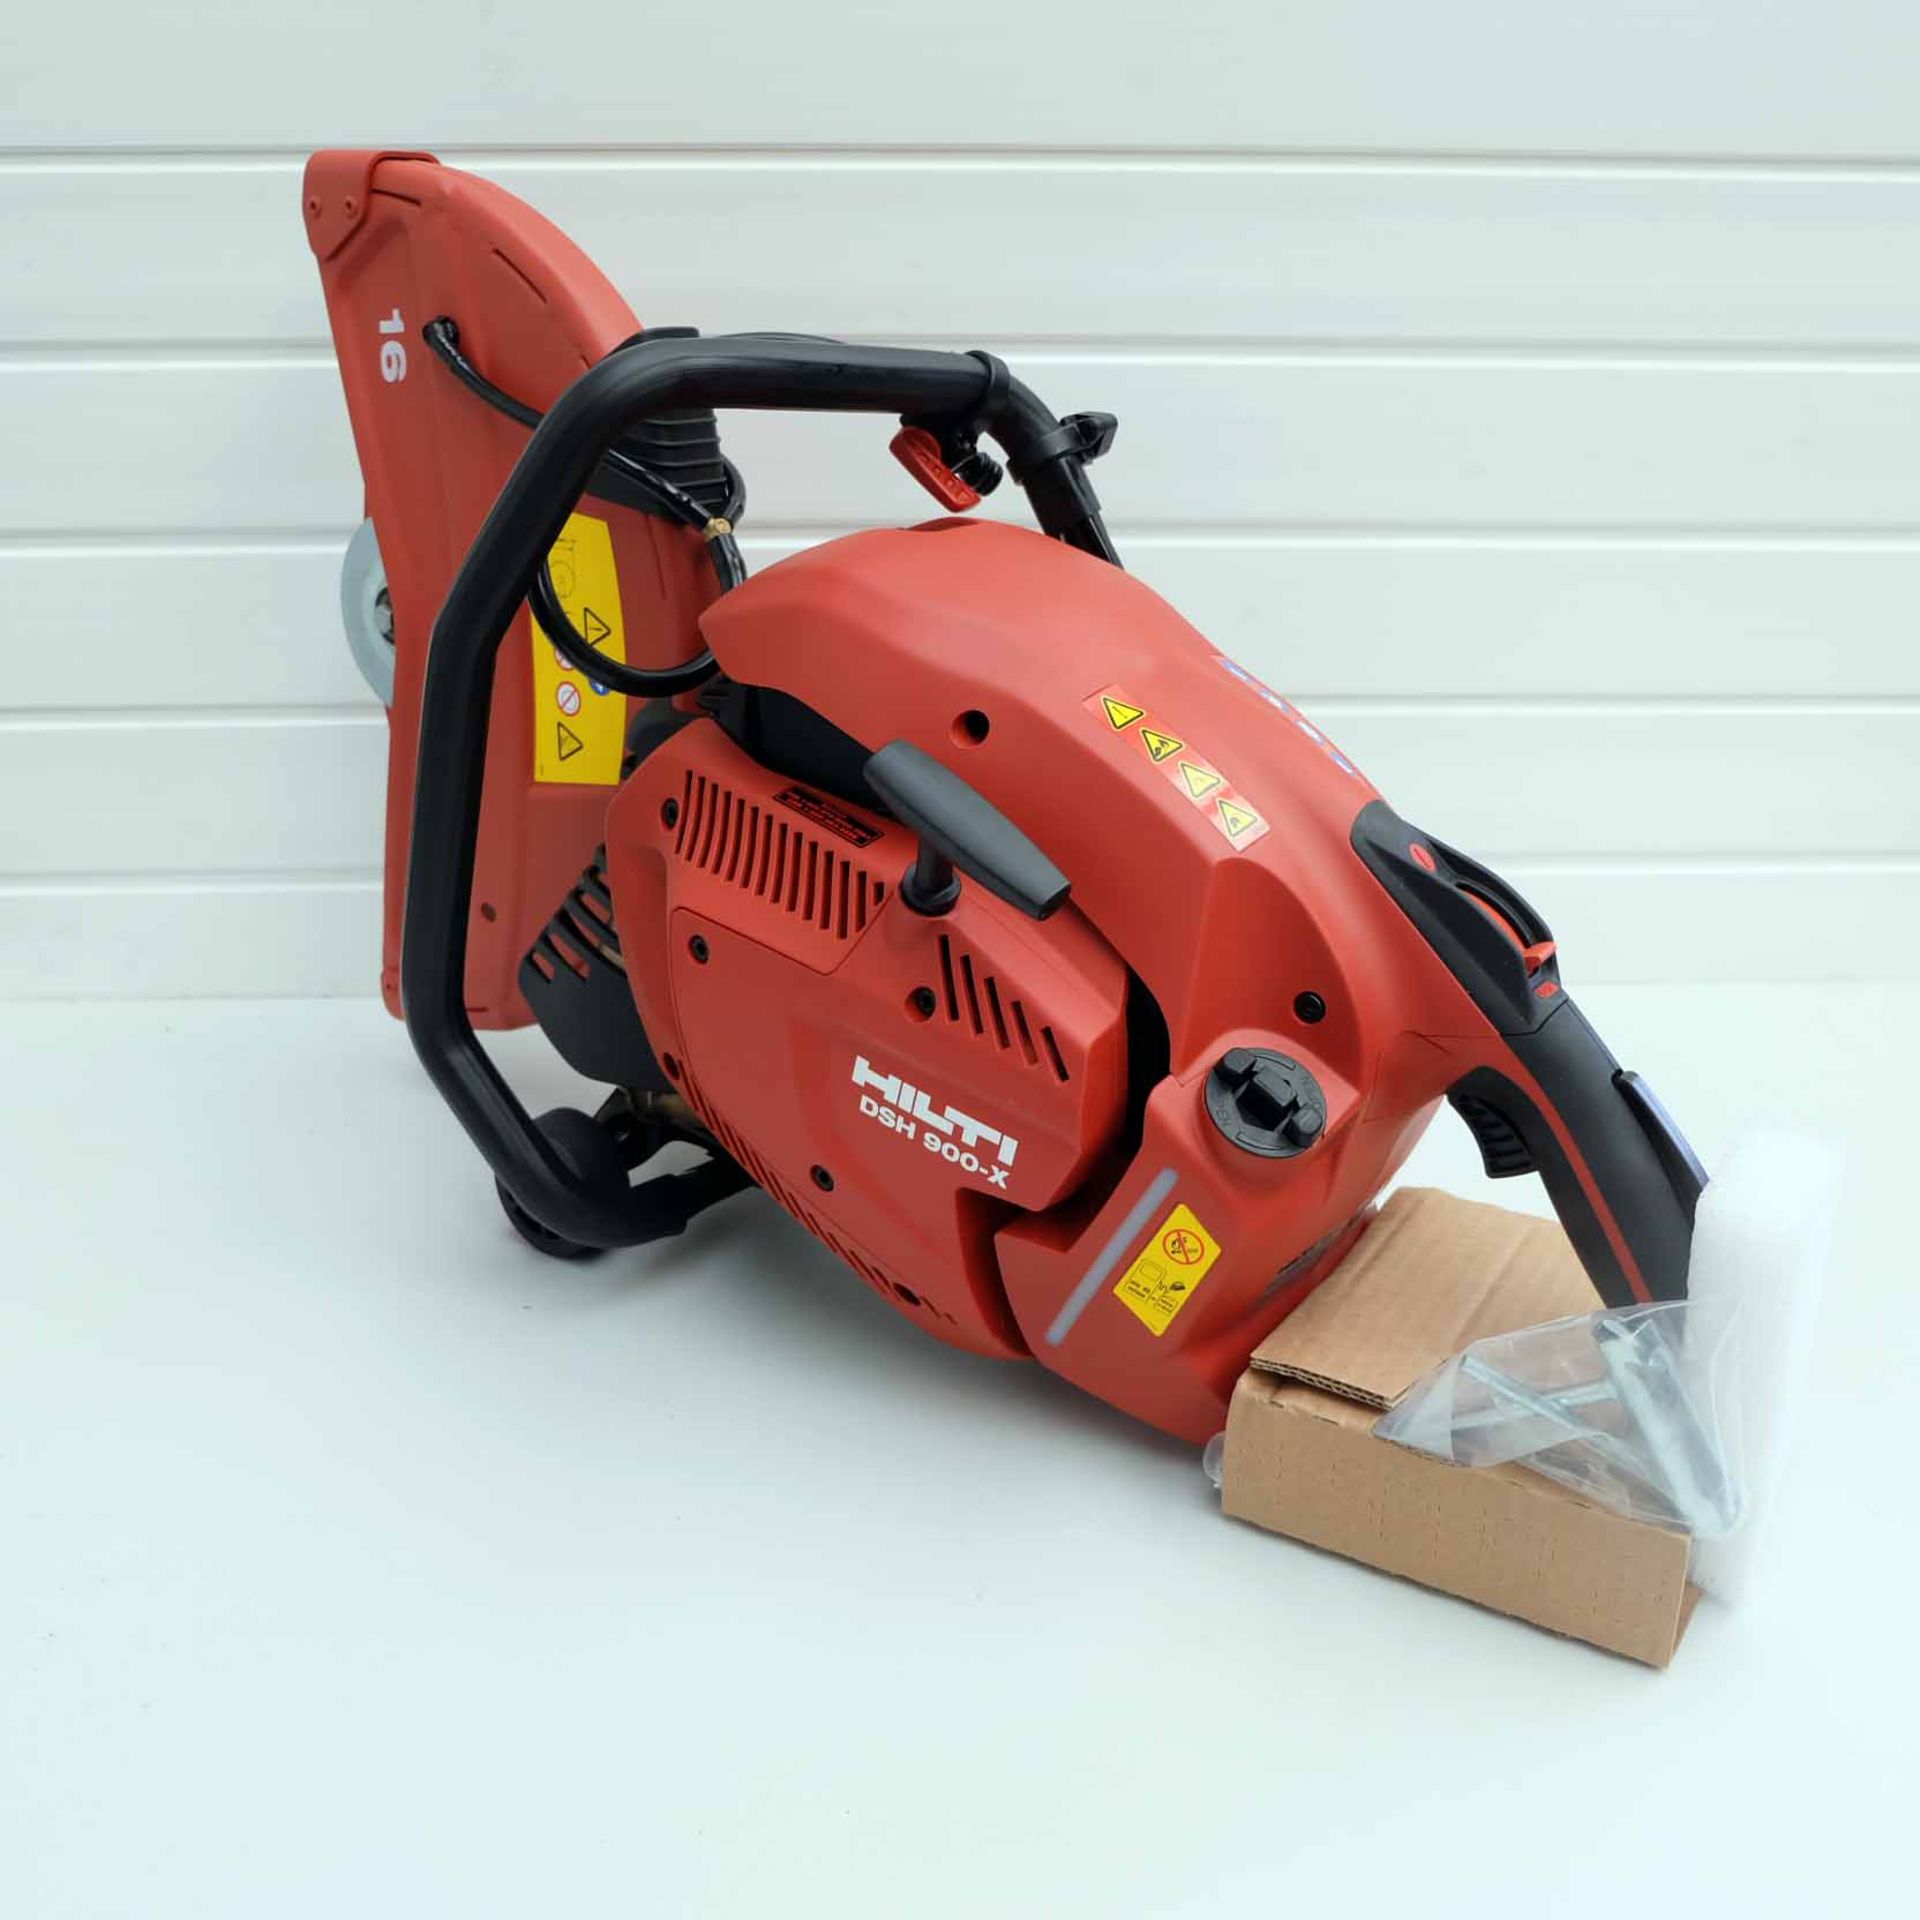 Hilti Hand Held Gas Saw. Model DSH 900-X 16". Complete With SP-16"x1" Blade. Easy Start Auto-Choke S - Image 4 of 22